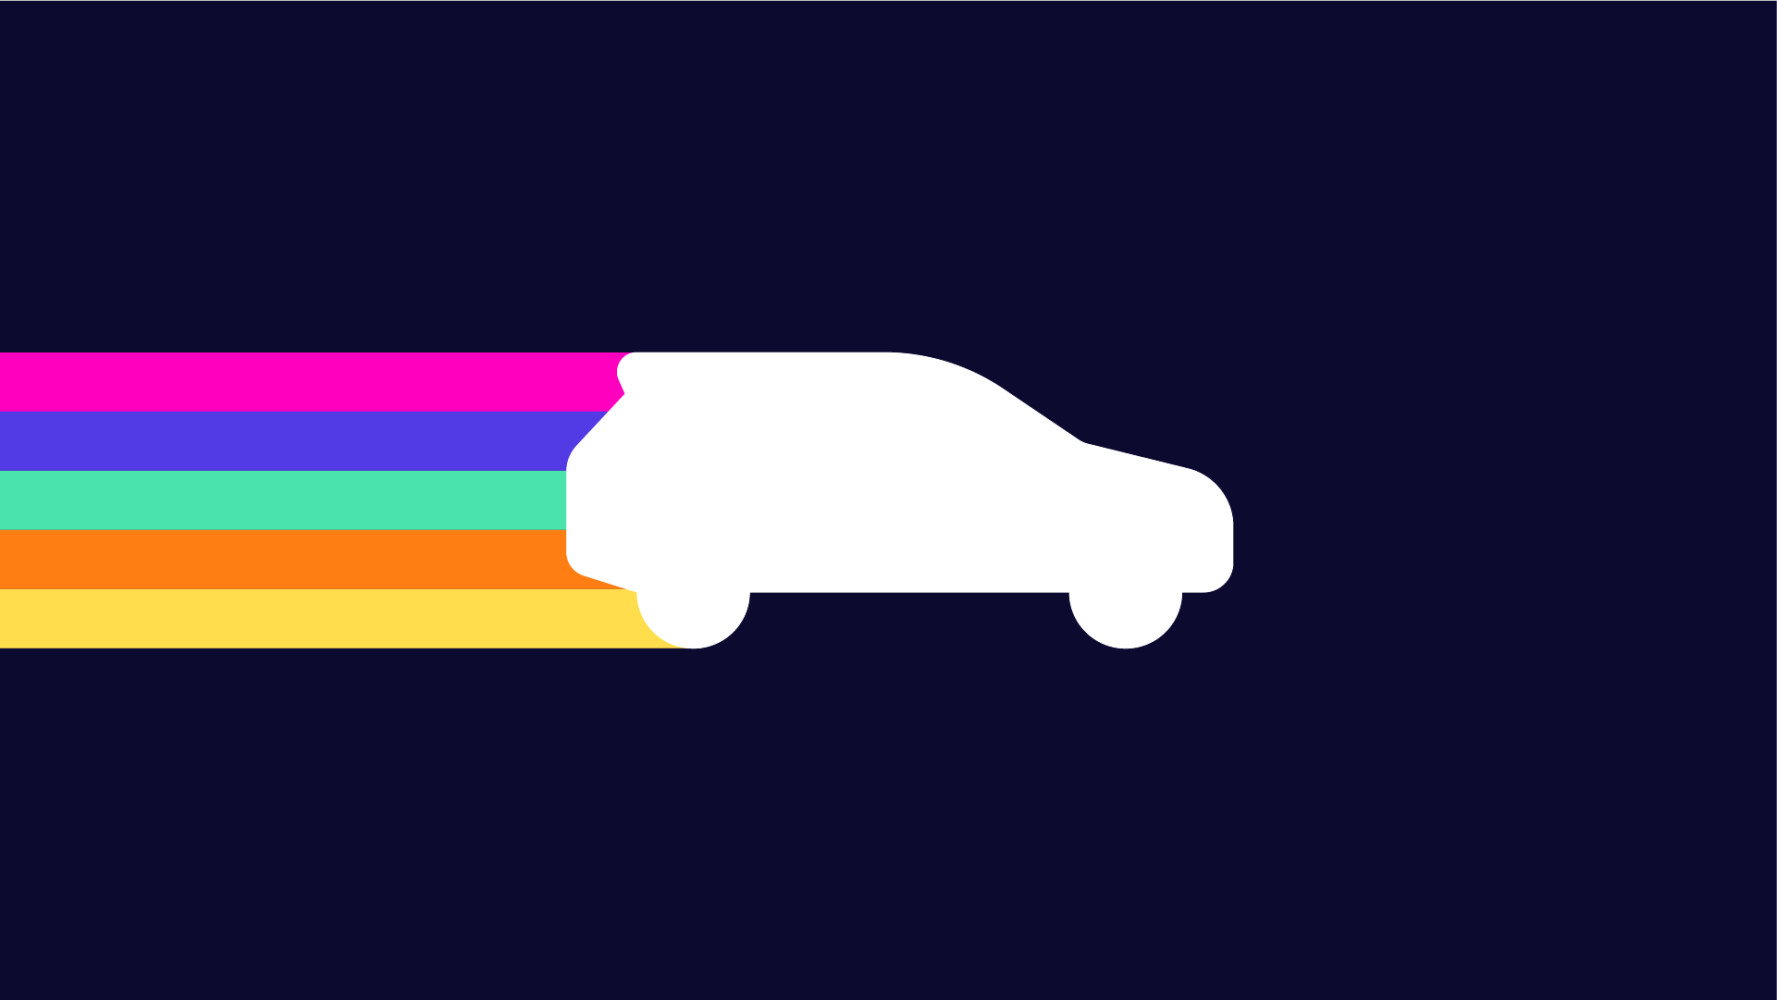 graphical illustration of a a white silhouette of an SUV with magenta, blue, teal, orange and yellow color bars extending from the bumper on a dark blue background.